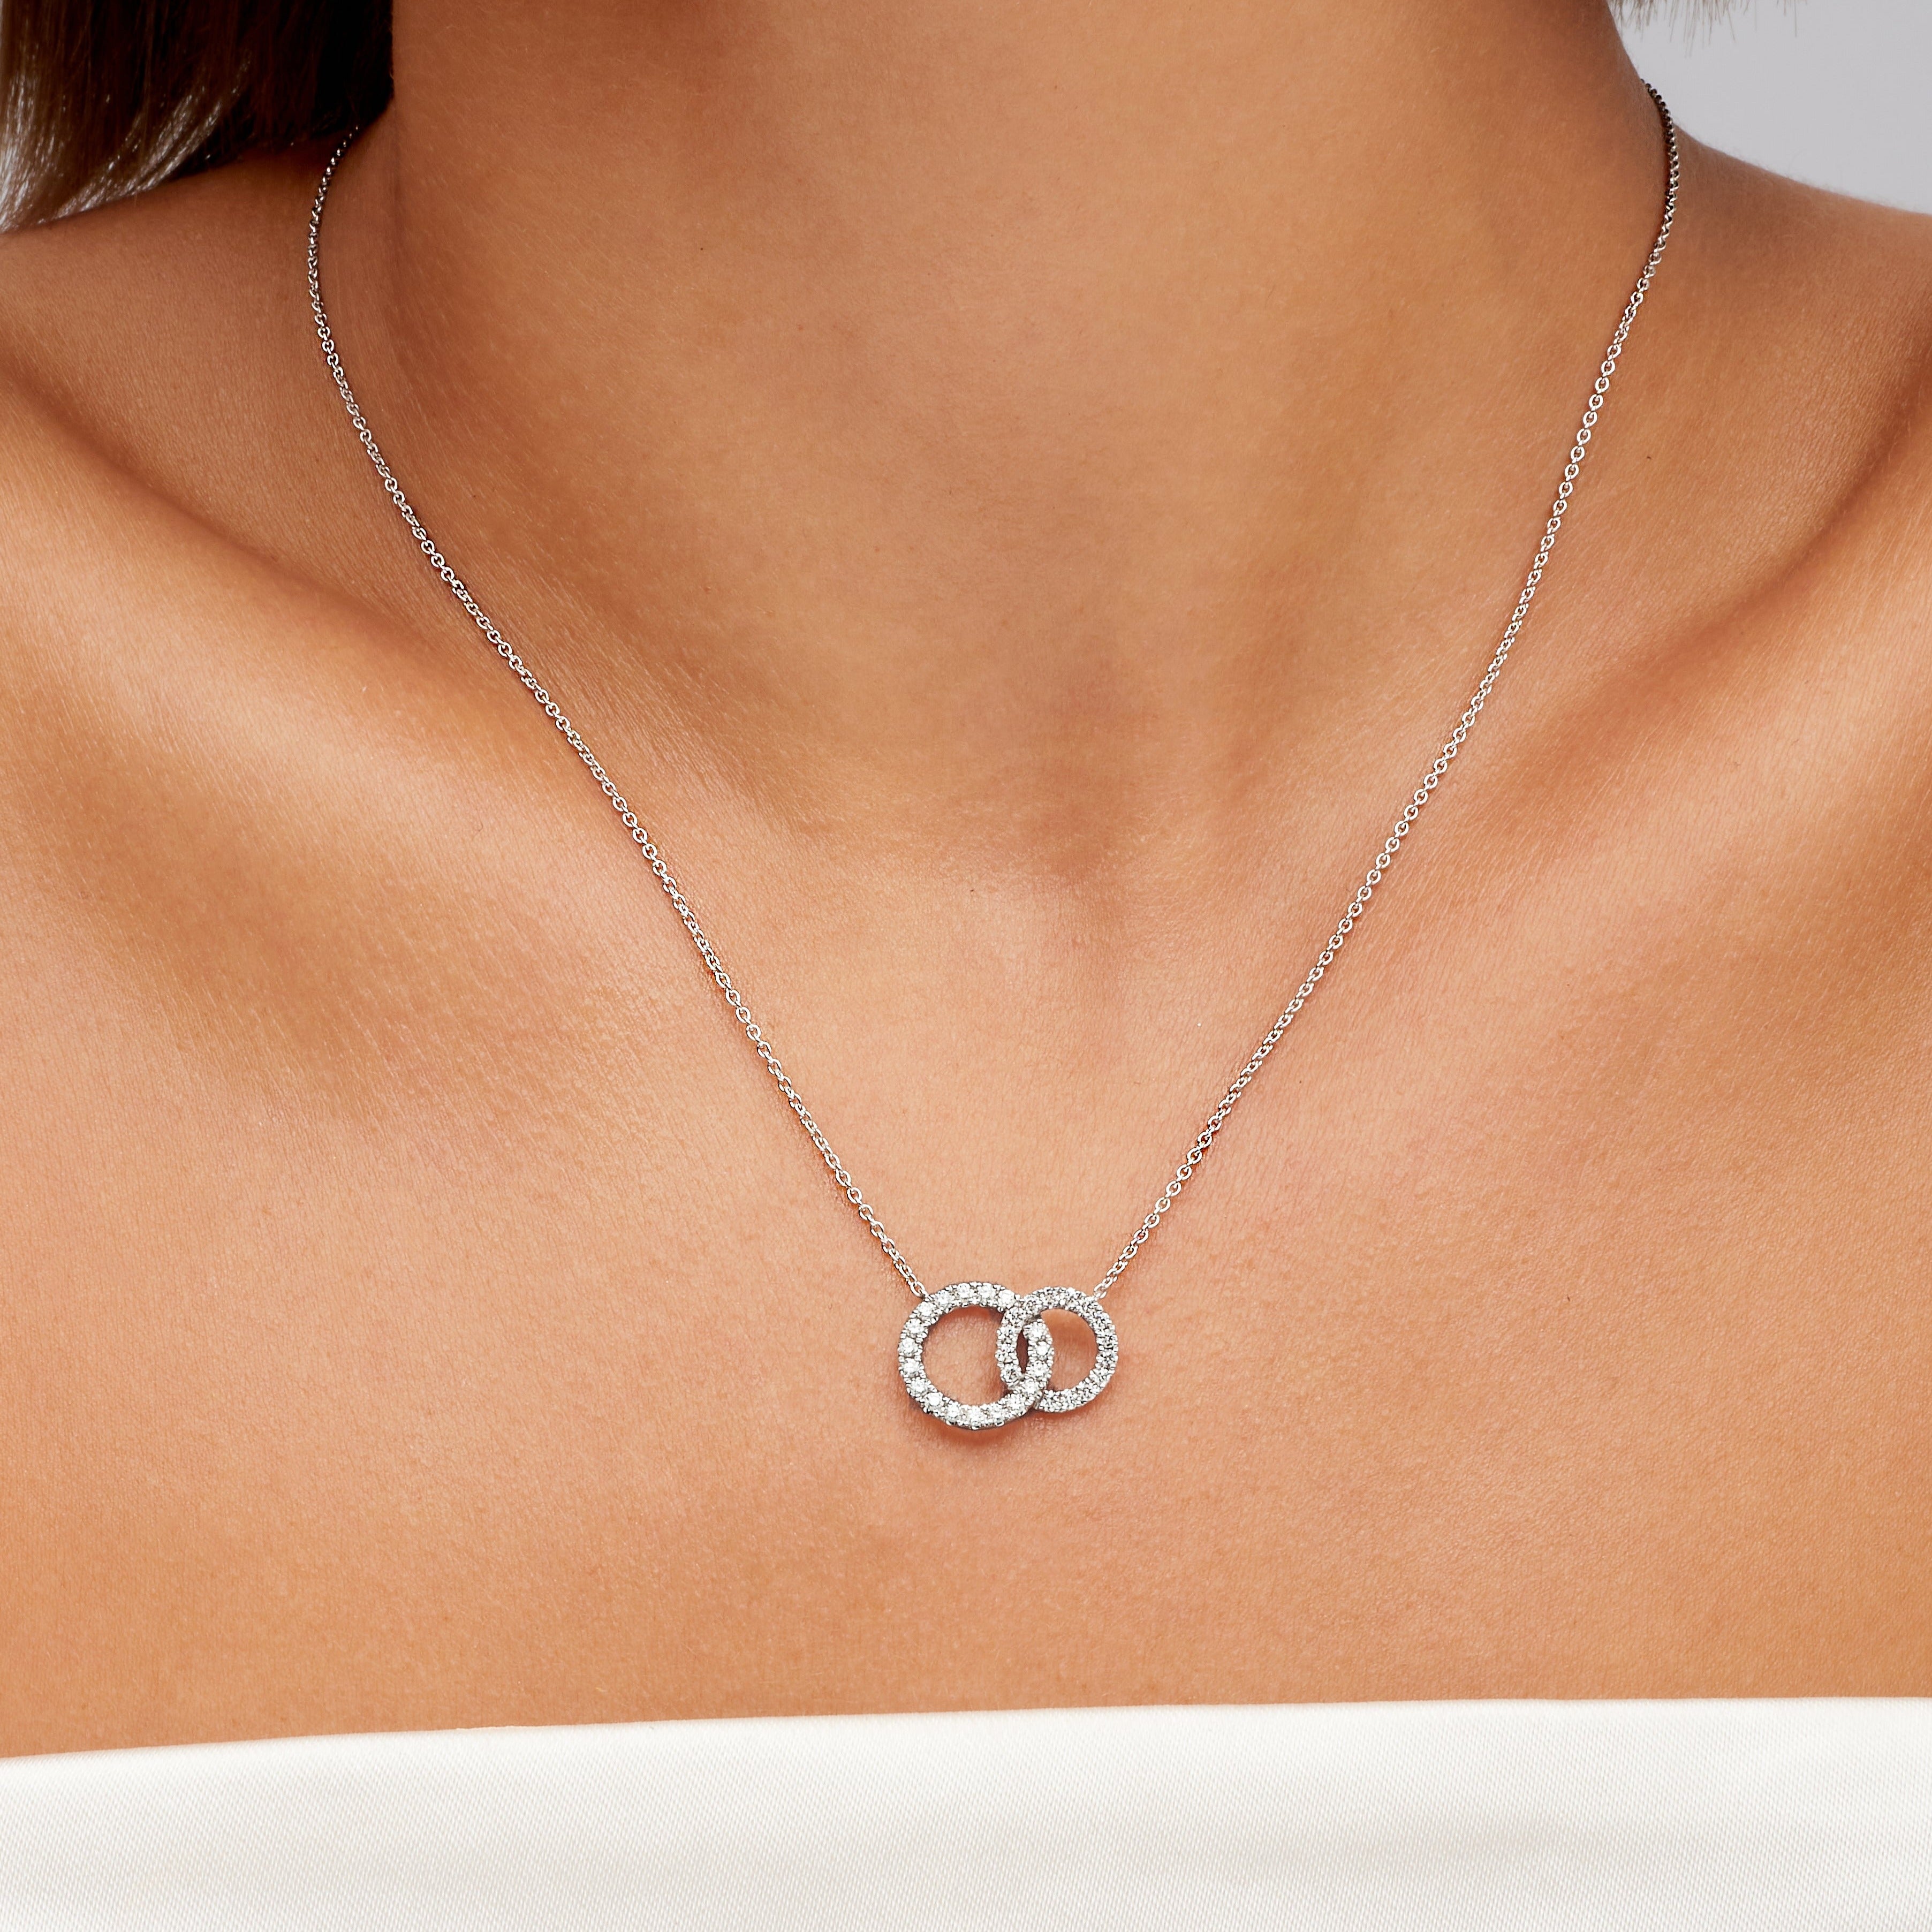 0.42 CT Diamond Linked Circles Pendant Necklace in 18K White Gold